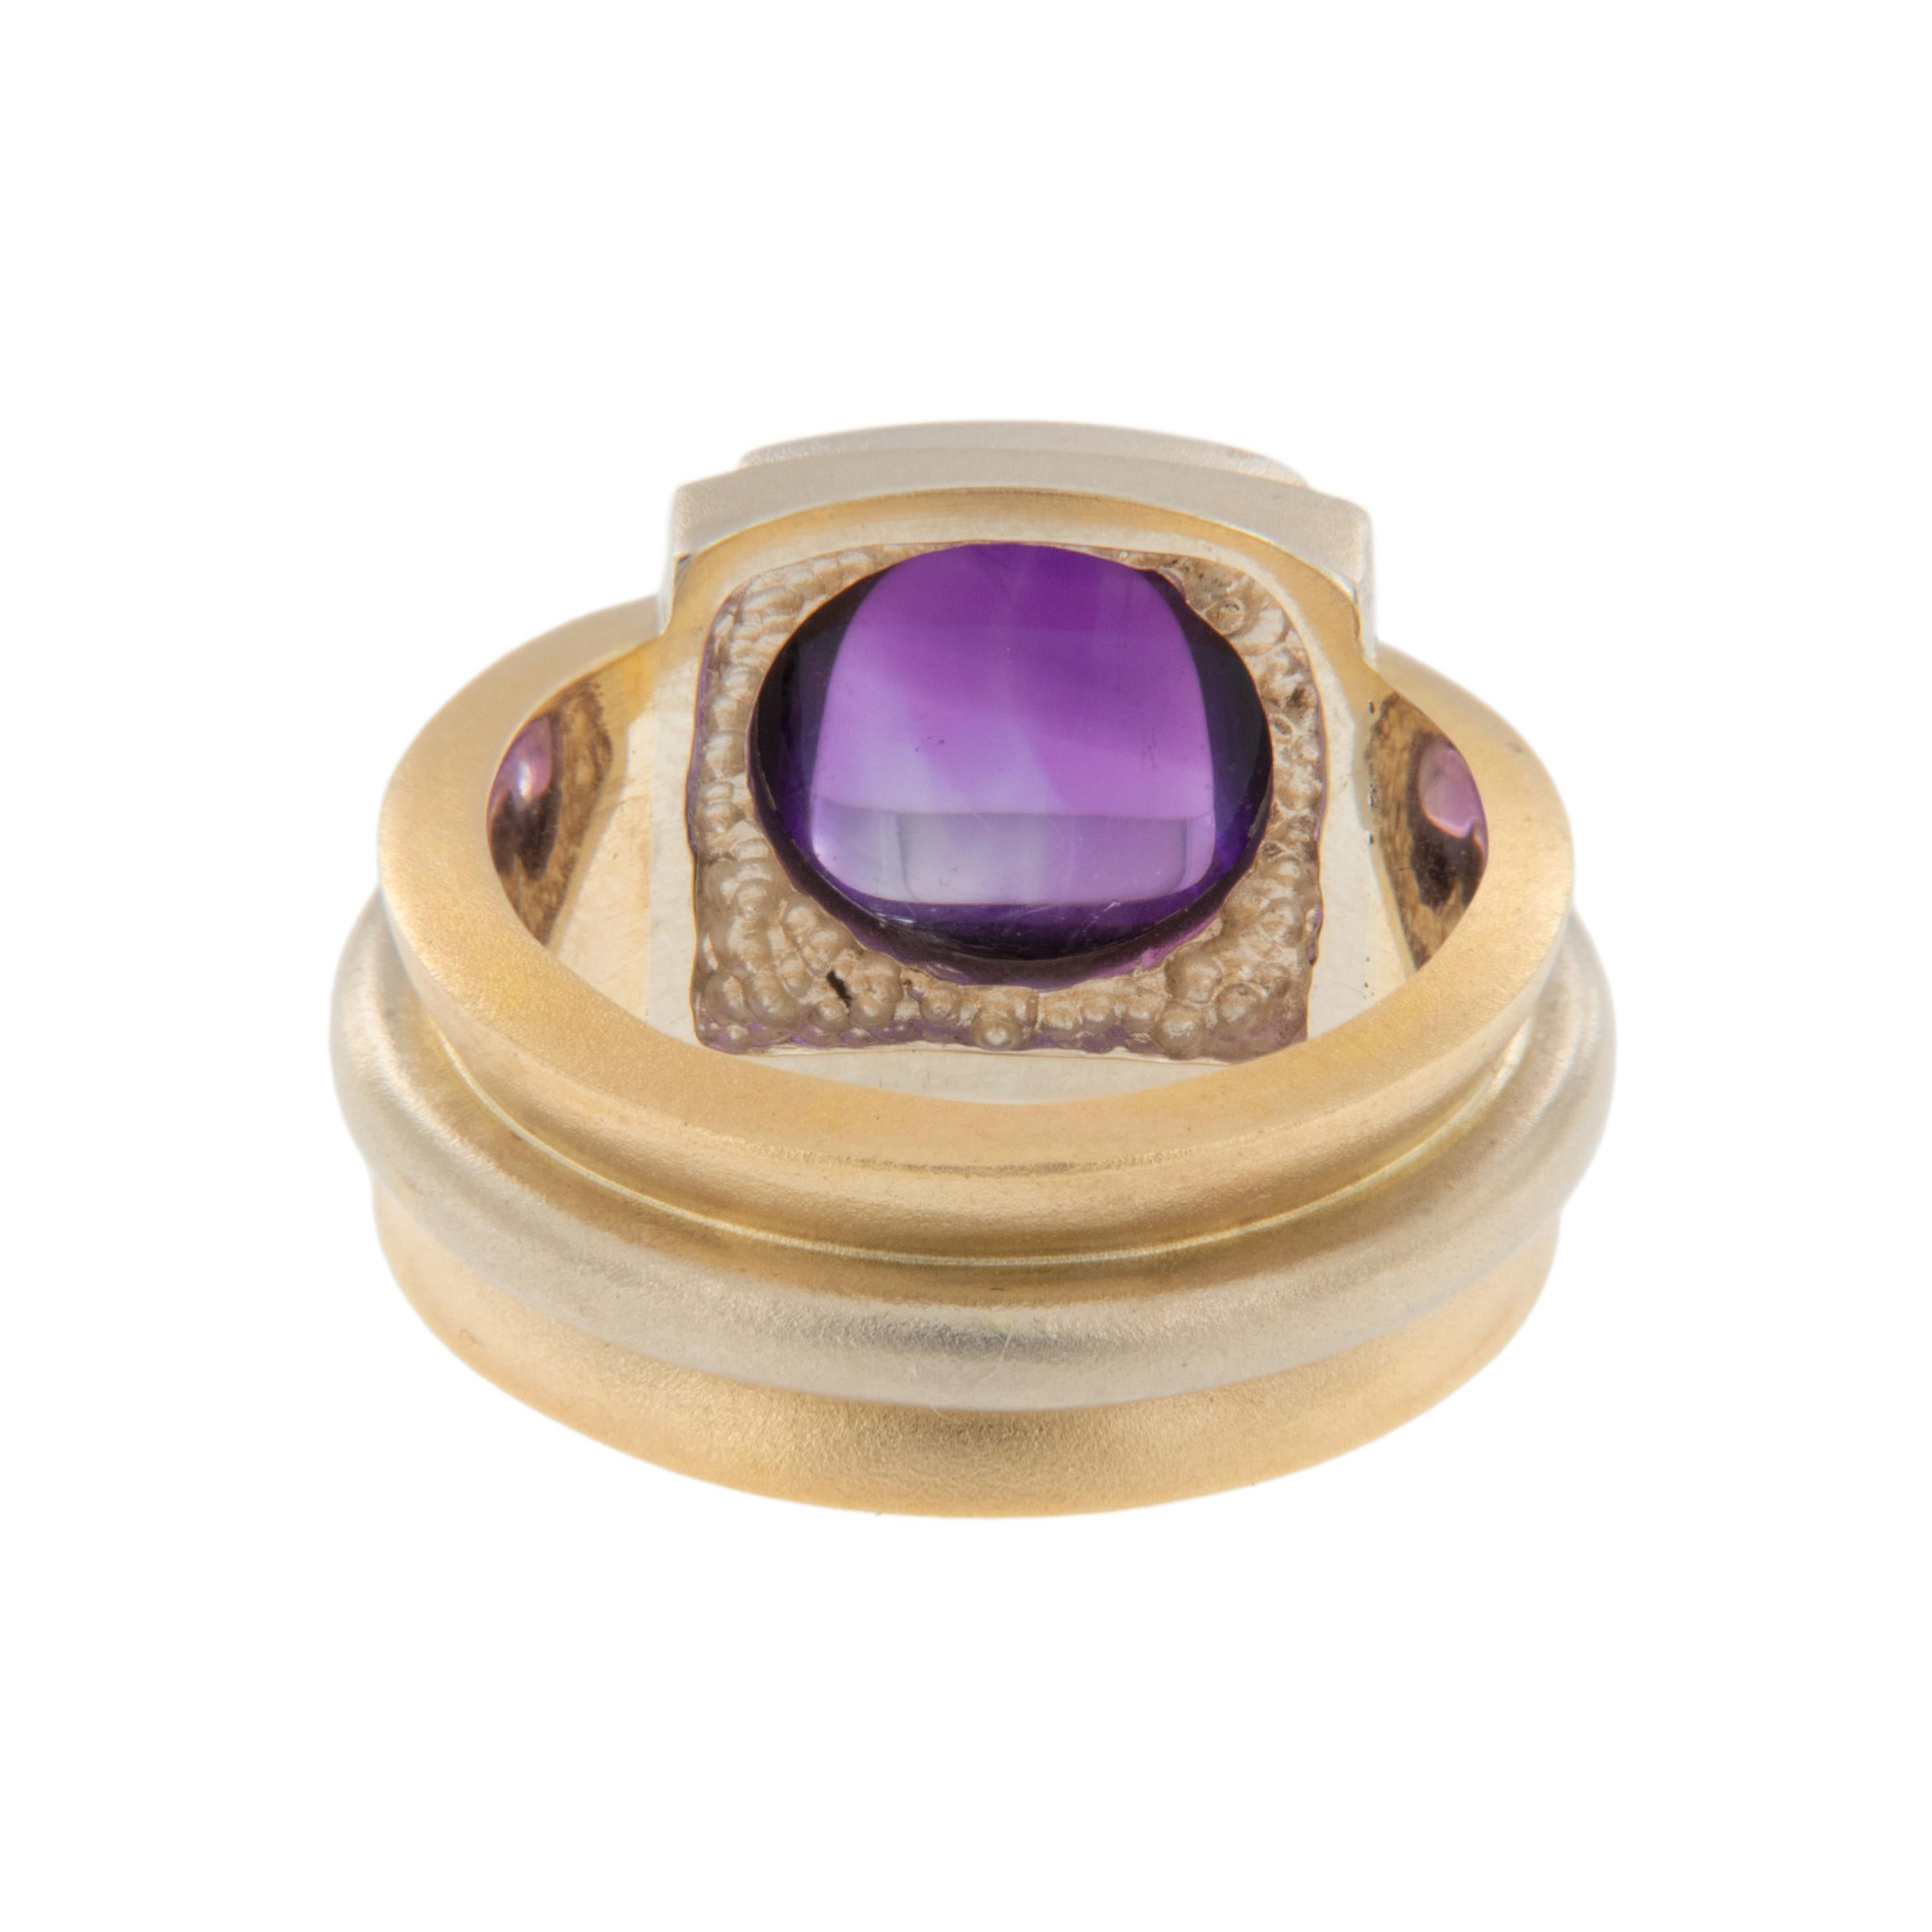 Sugarloaf Cabochon 14 Karat Yellow Gold  and White Gold Sugarloaf Amethyst Ring by Patrick Irla For Sale